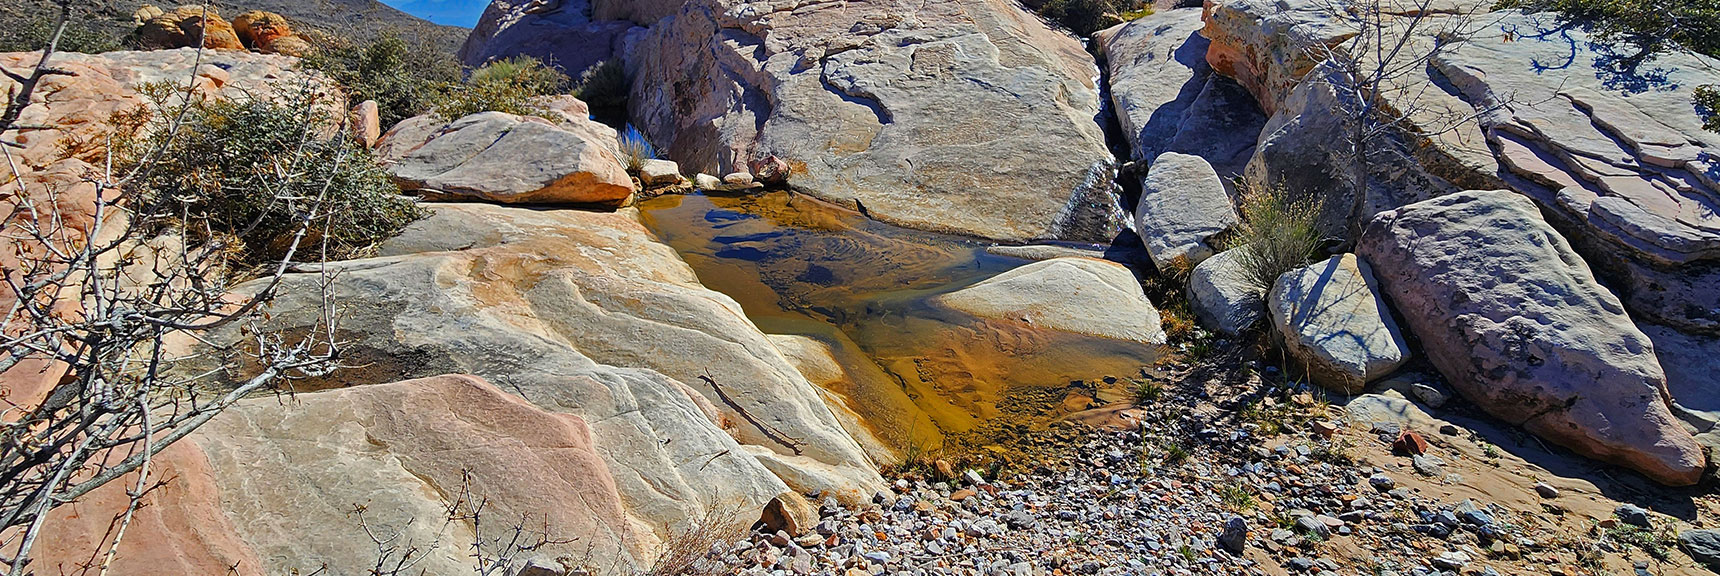 Ephemeral Pool Just Beyond the Upper End of Gray Cap Ridge | Brownstone Trail | Calico Basin | Brownstone Basin | La Madre Mountains Wilderness, Nevada